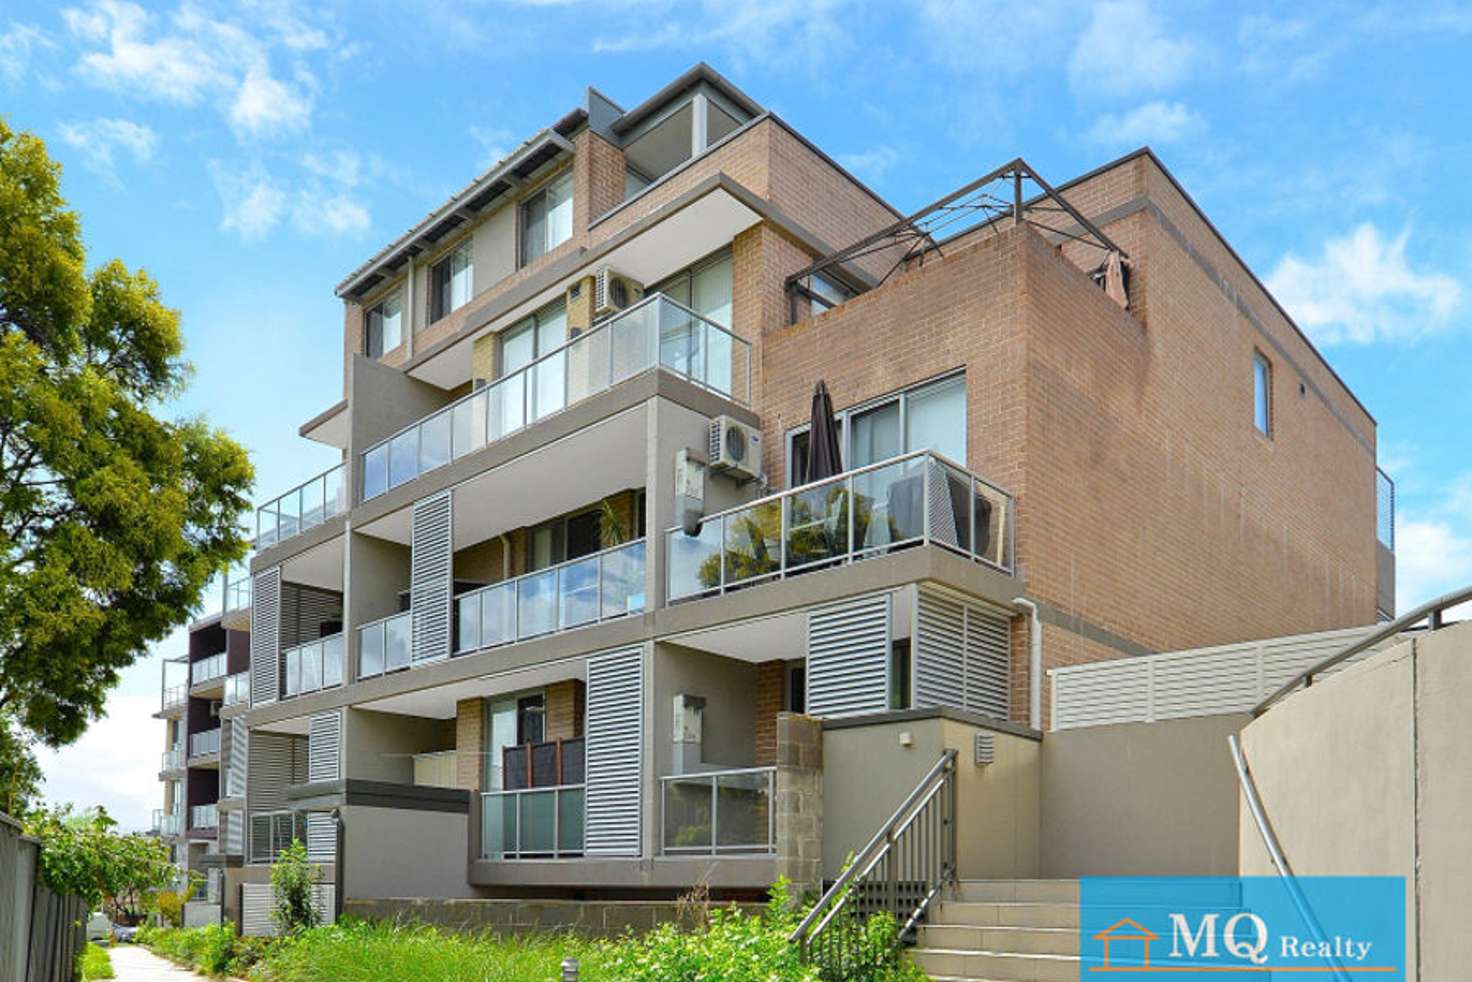 Main view of Homely apartment listing, 91/79-87 Beaconsfield Street, Silverwater NSW 2128